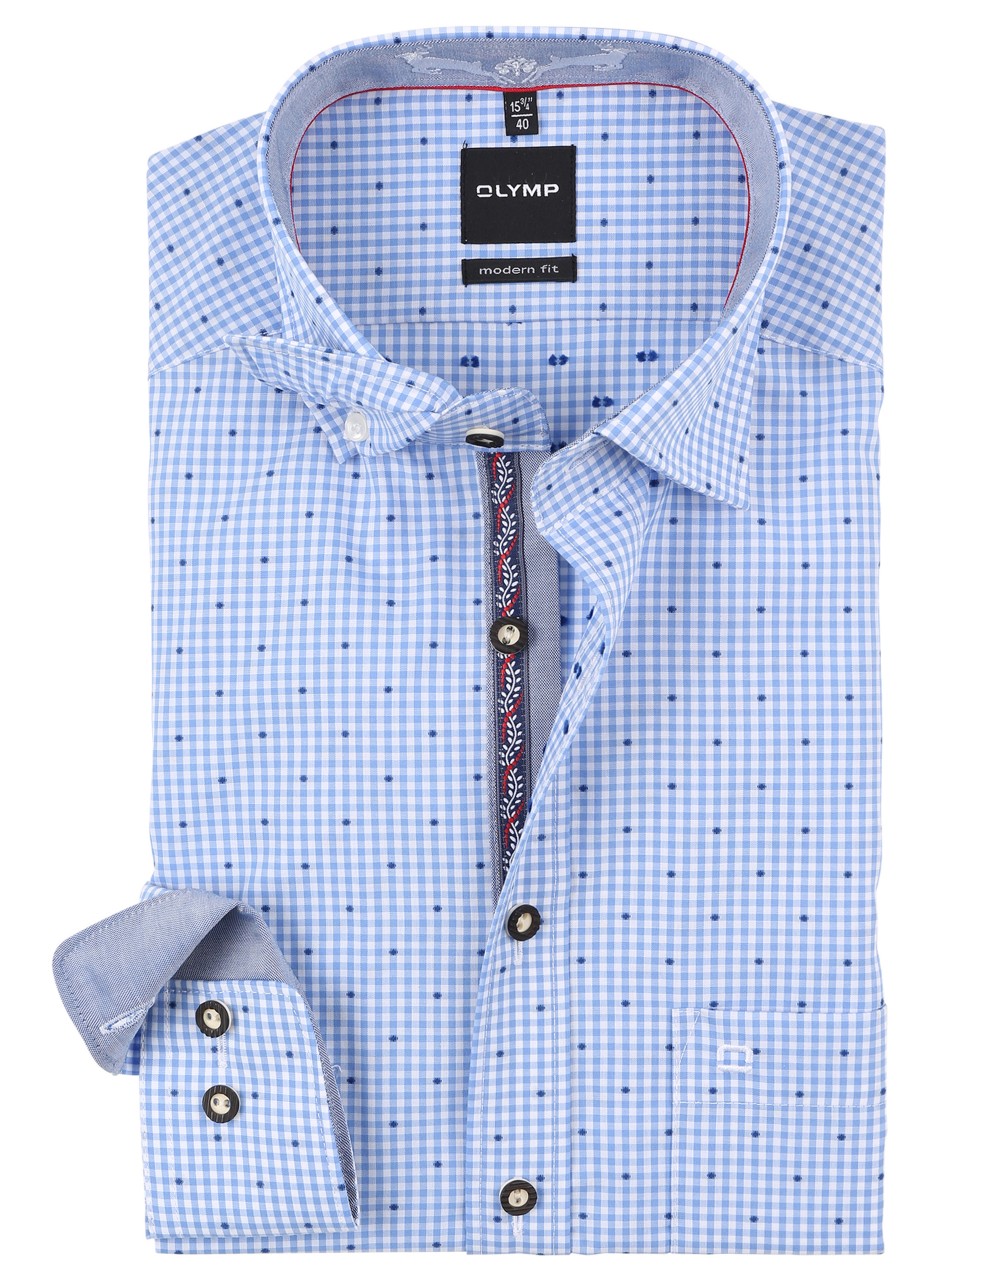 Preview: Trachten Shirt Olymp, blue-white checked